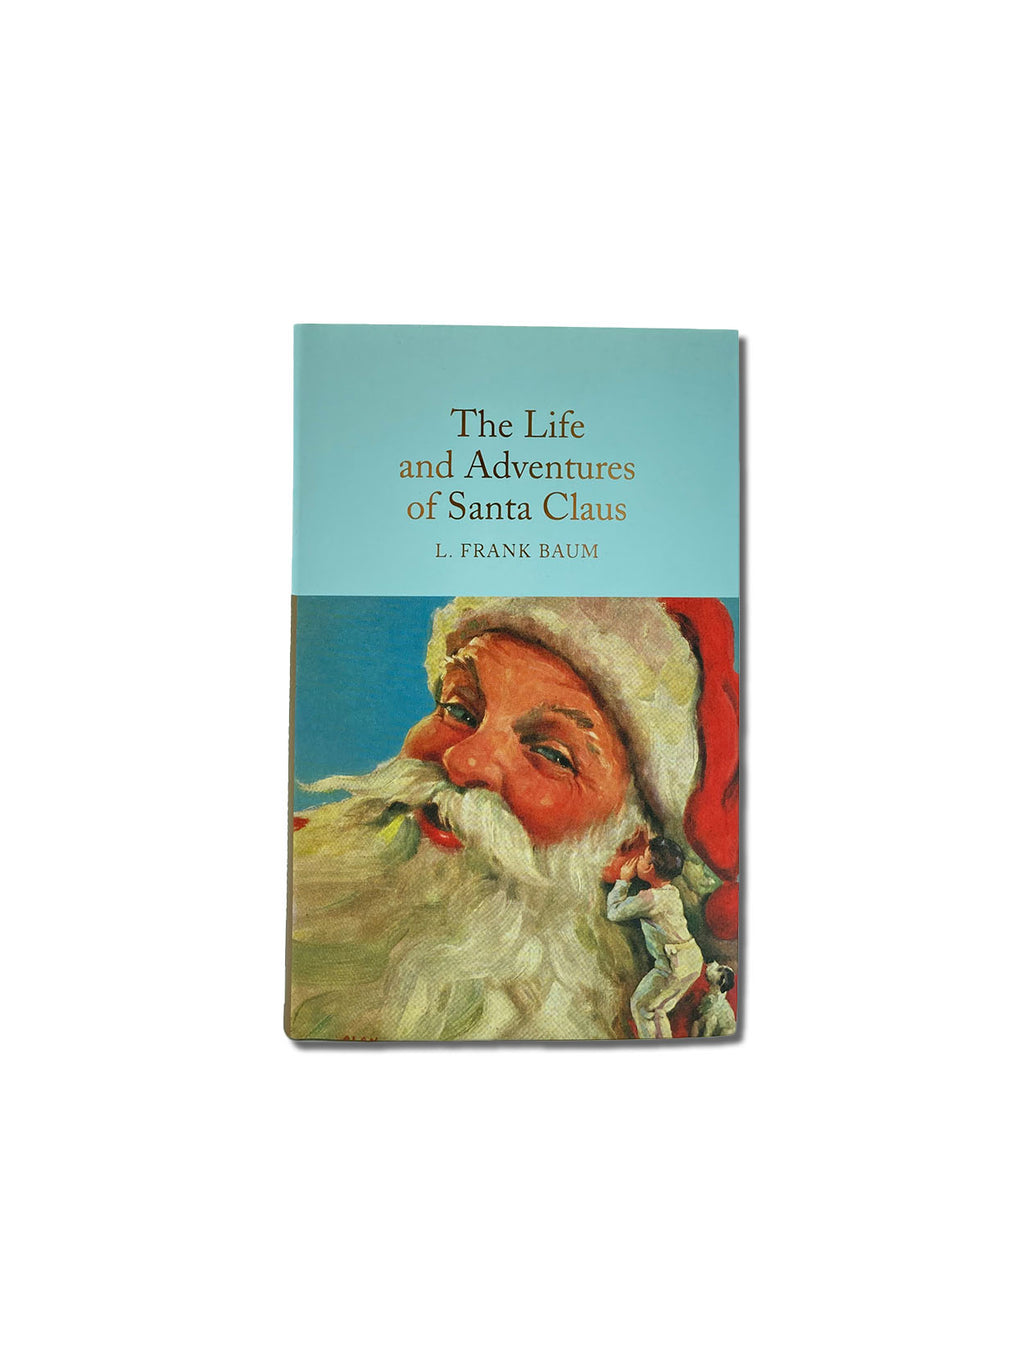 The Life and Adventures of Santa Claus - Macmillan Collector's Library